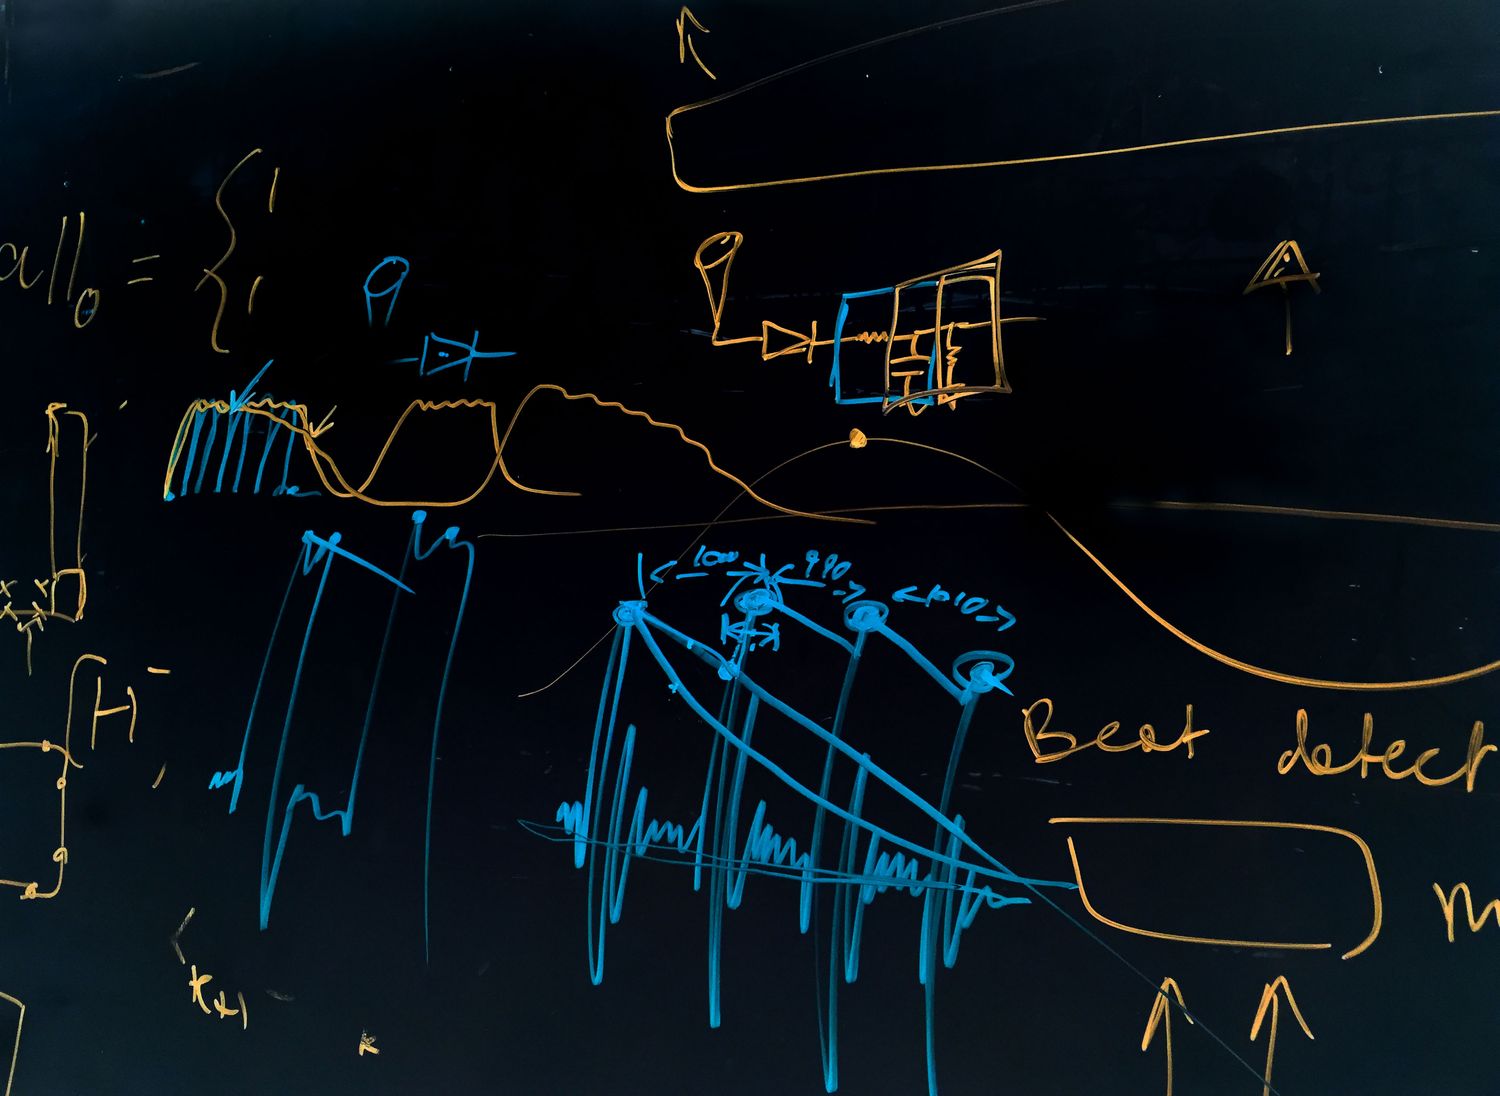 Bright blue and orange scribbles on a dark surface